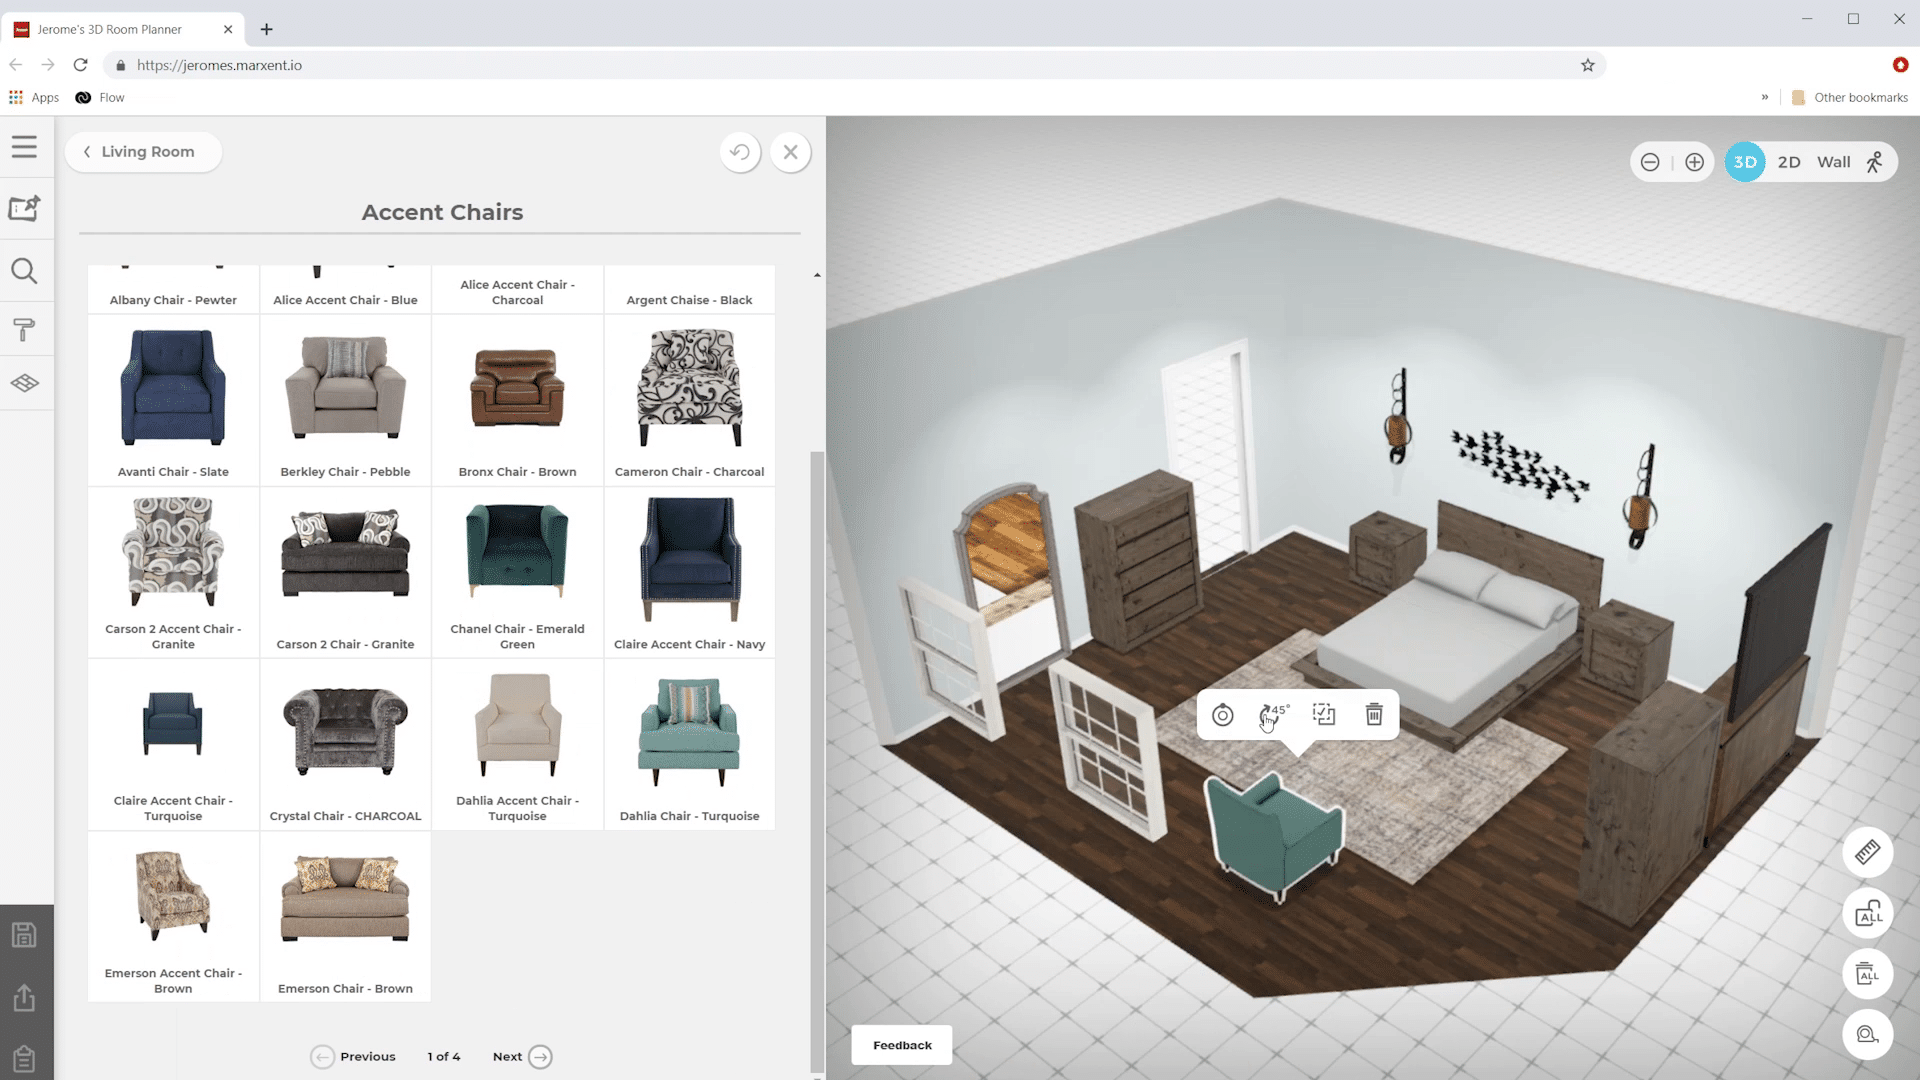 Jerome’s Furniture launches 3D Augmented Reality app